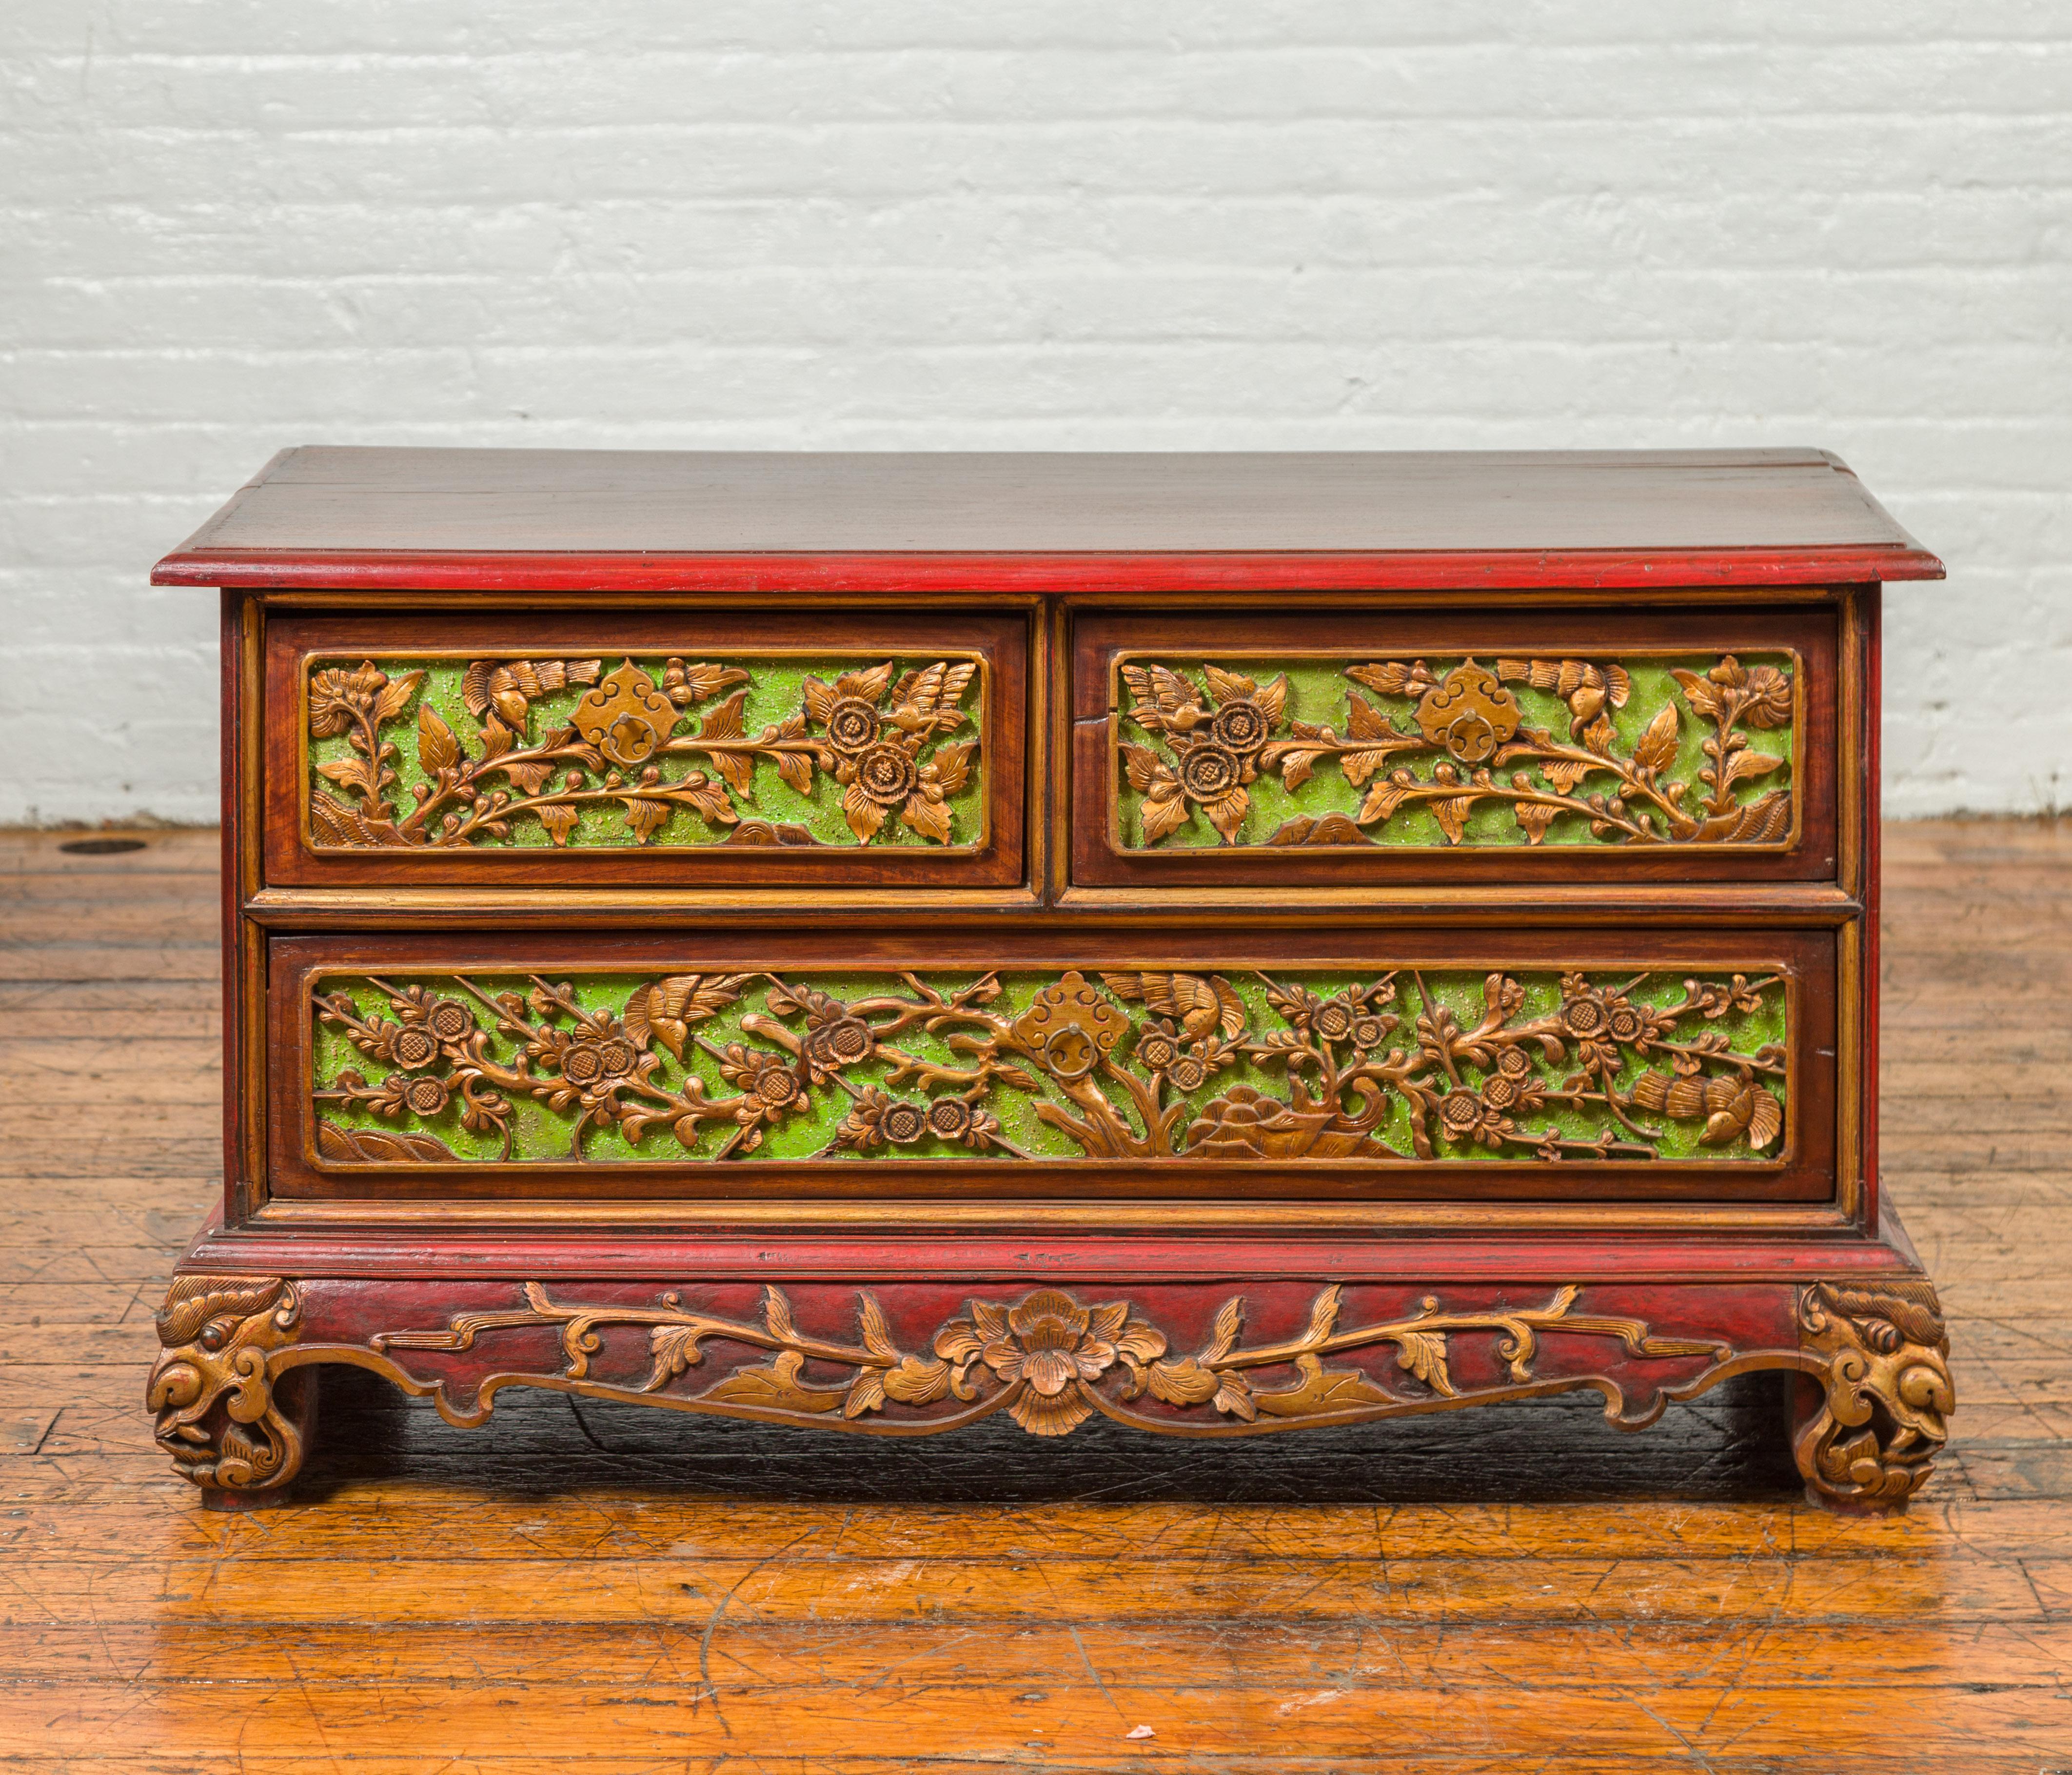 An Indonesian polychrome dresser from Madura with carved drawers and verdigris highlights. Emanating a breathtaking fusion of vivid colors and exquisite craftsmanship, this 19th century Indonesian polychrome dresser from Madura is the quintessence